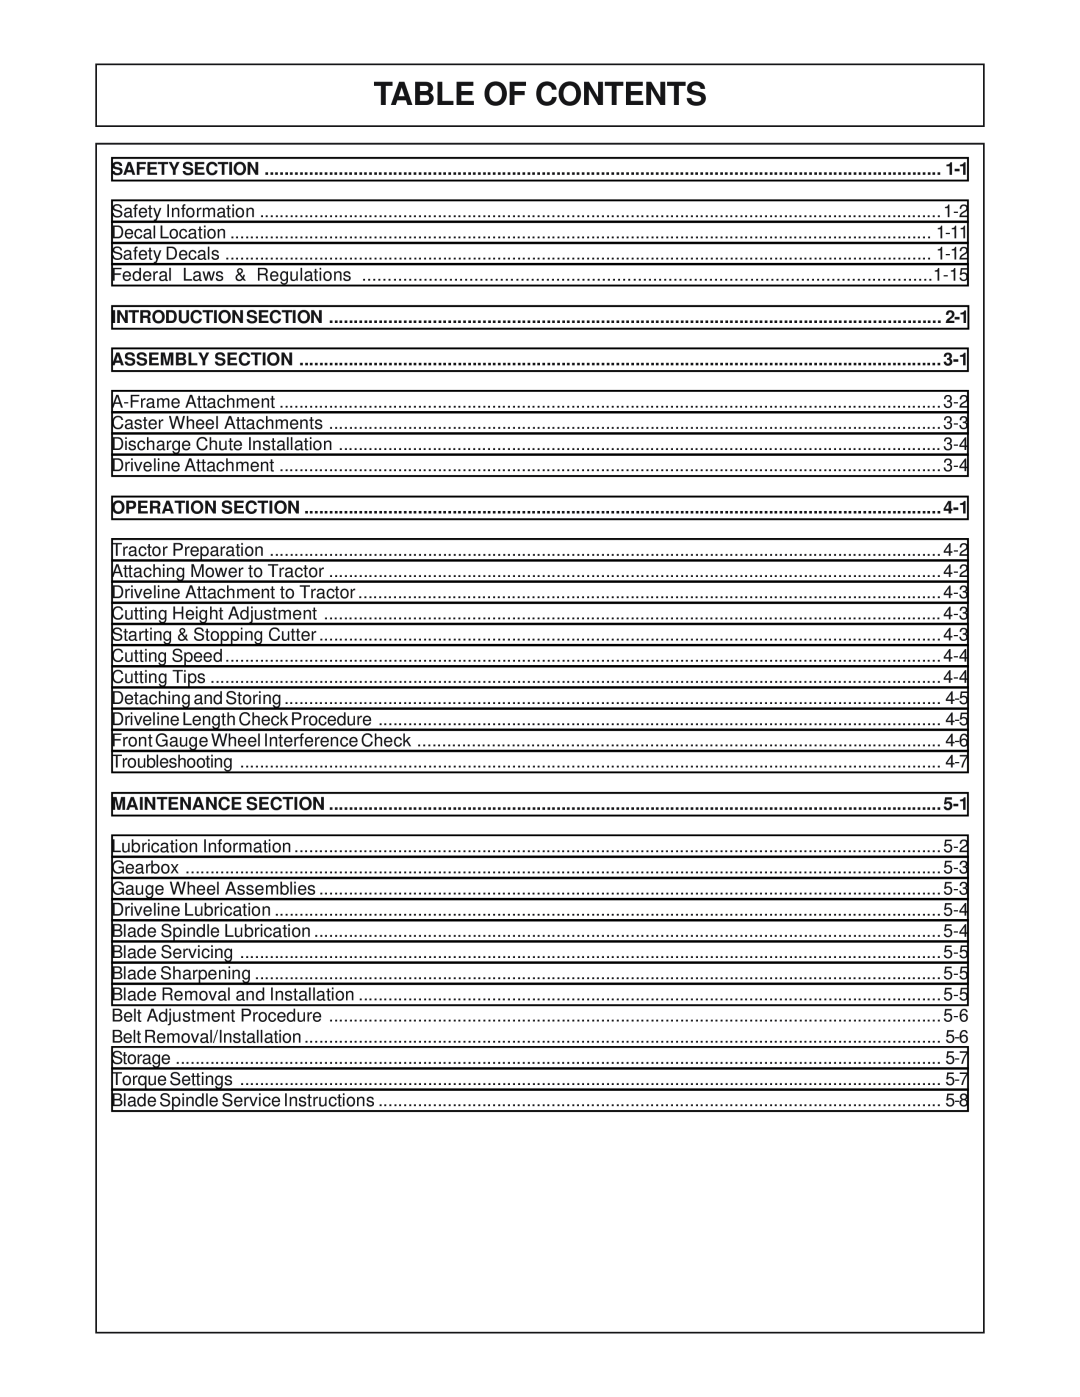 Servis-Rhino FM60/72 manual Table Of Contents, Safety Section, Introduction Section, Assembly Section, Operation Section 